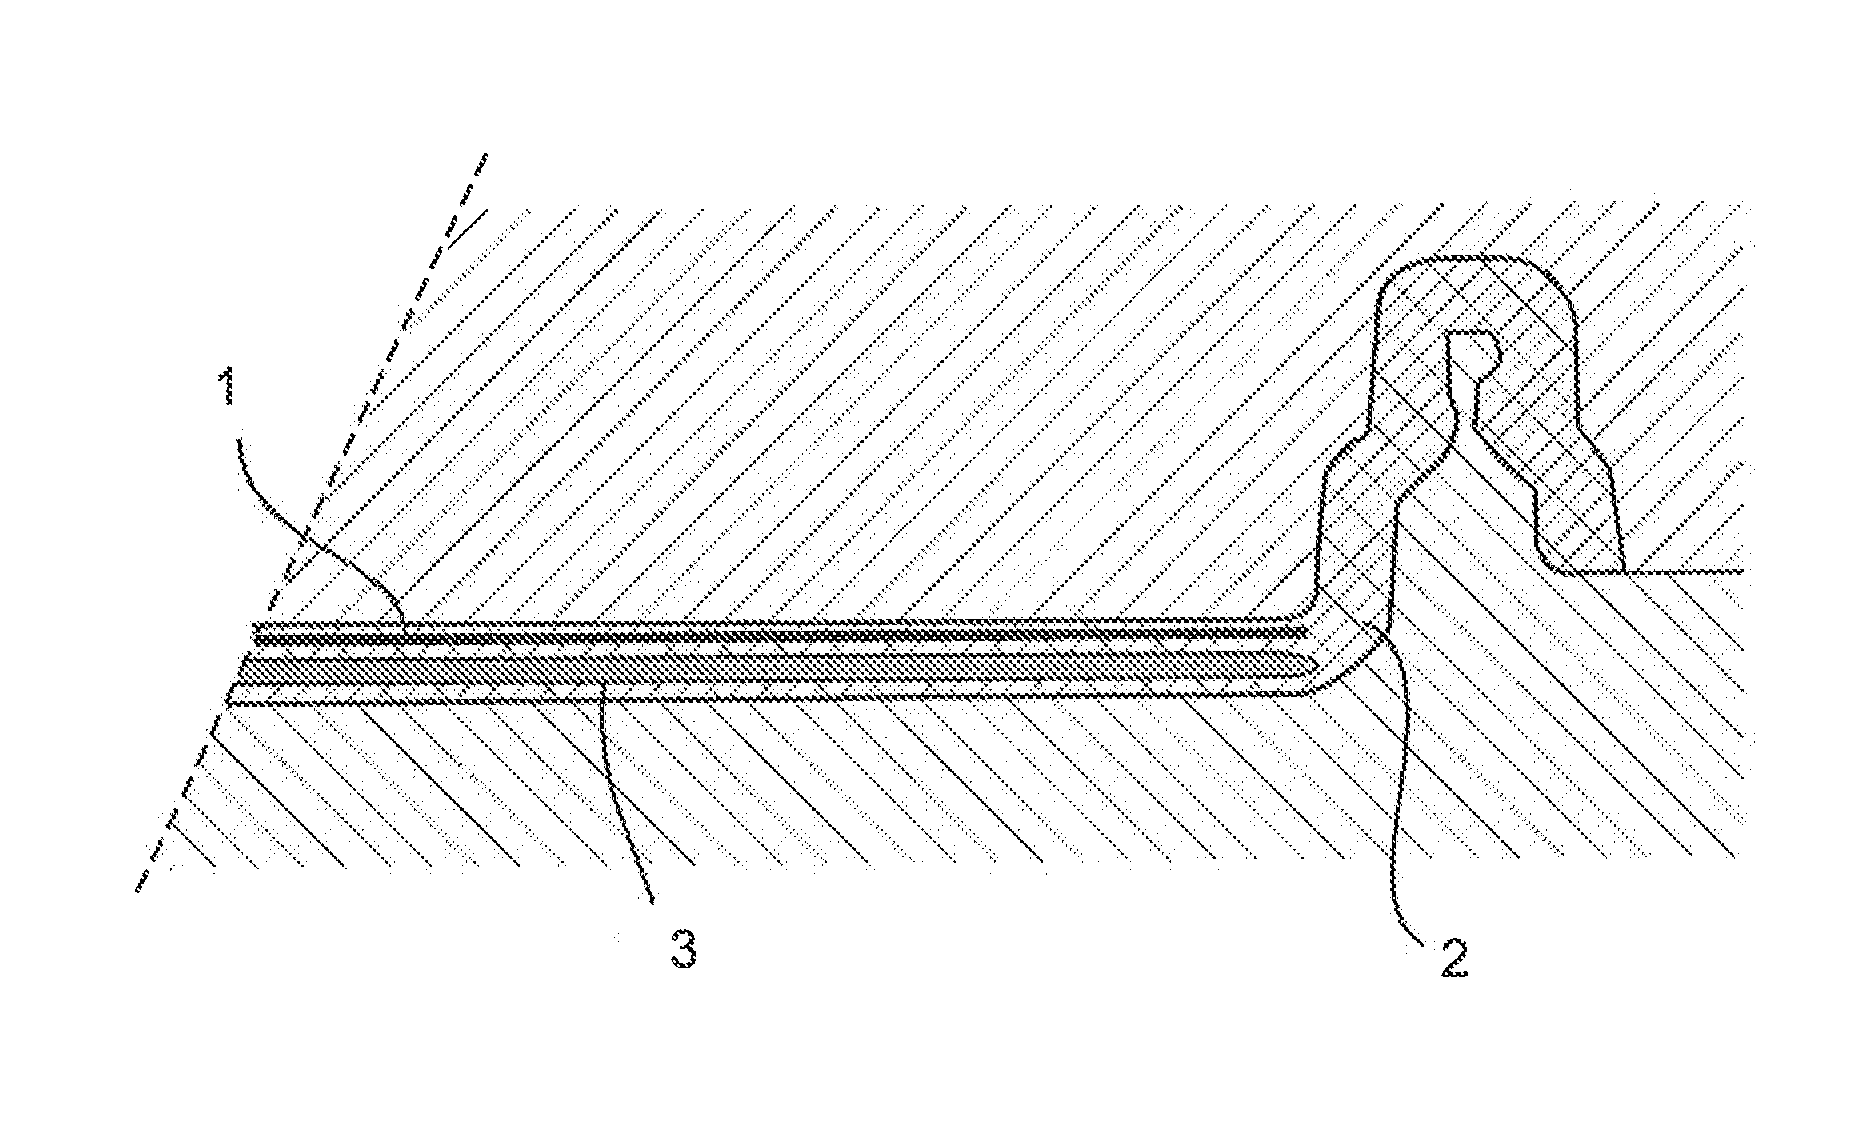 Method of manufacturing a packaging with IML barrier film in combination with oxygen scavenger